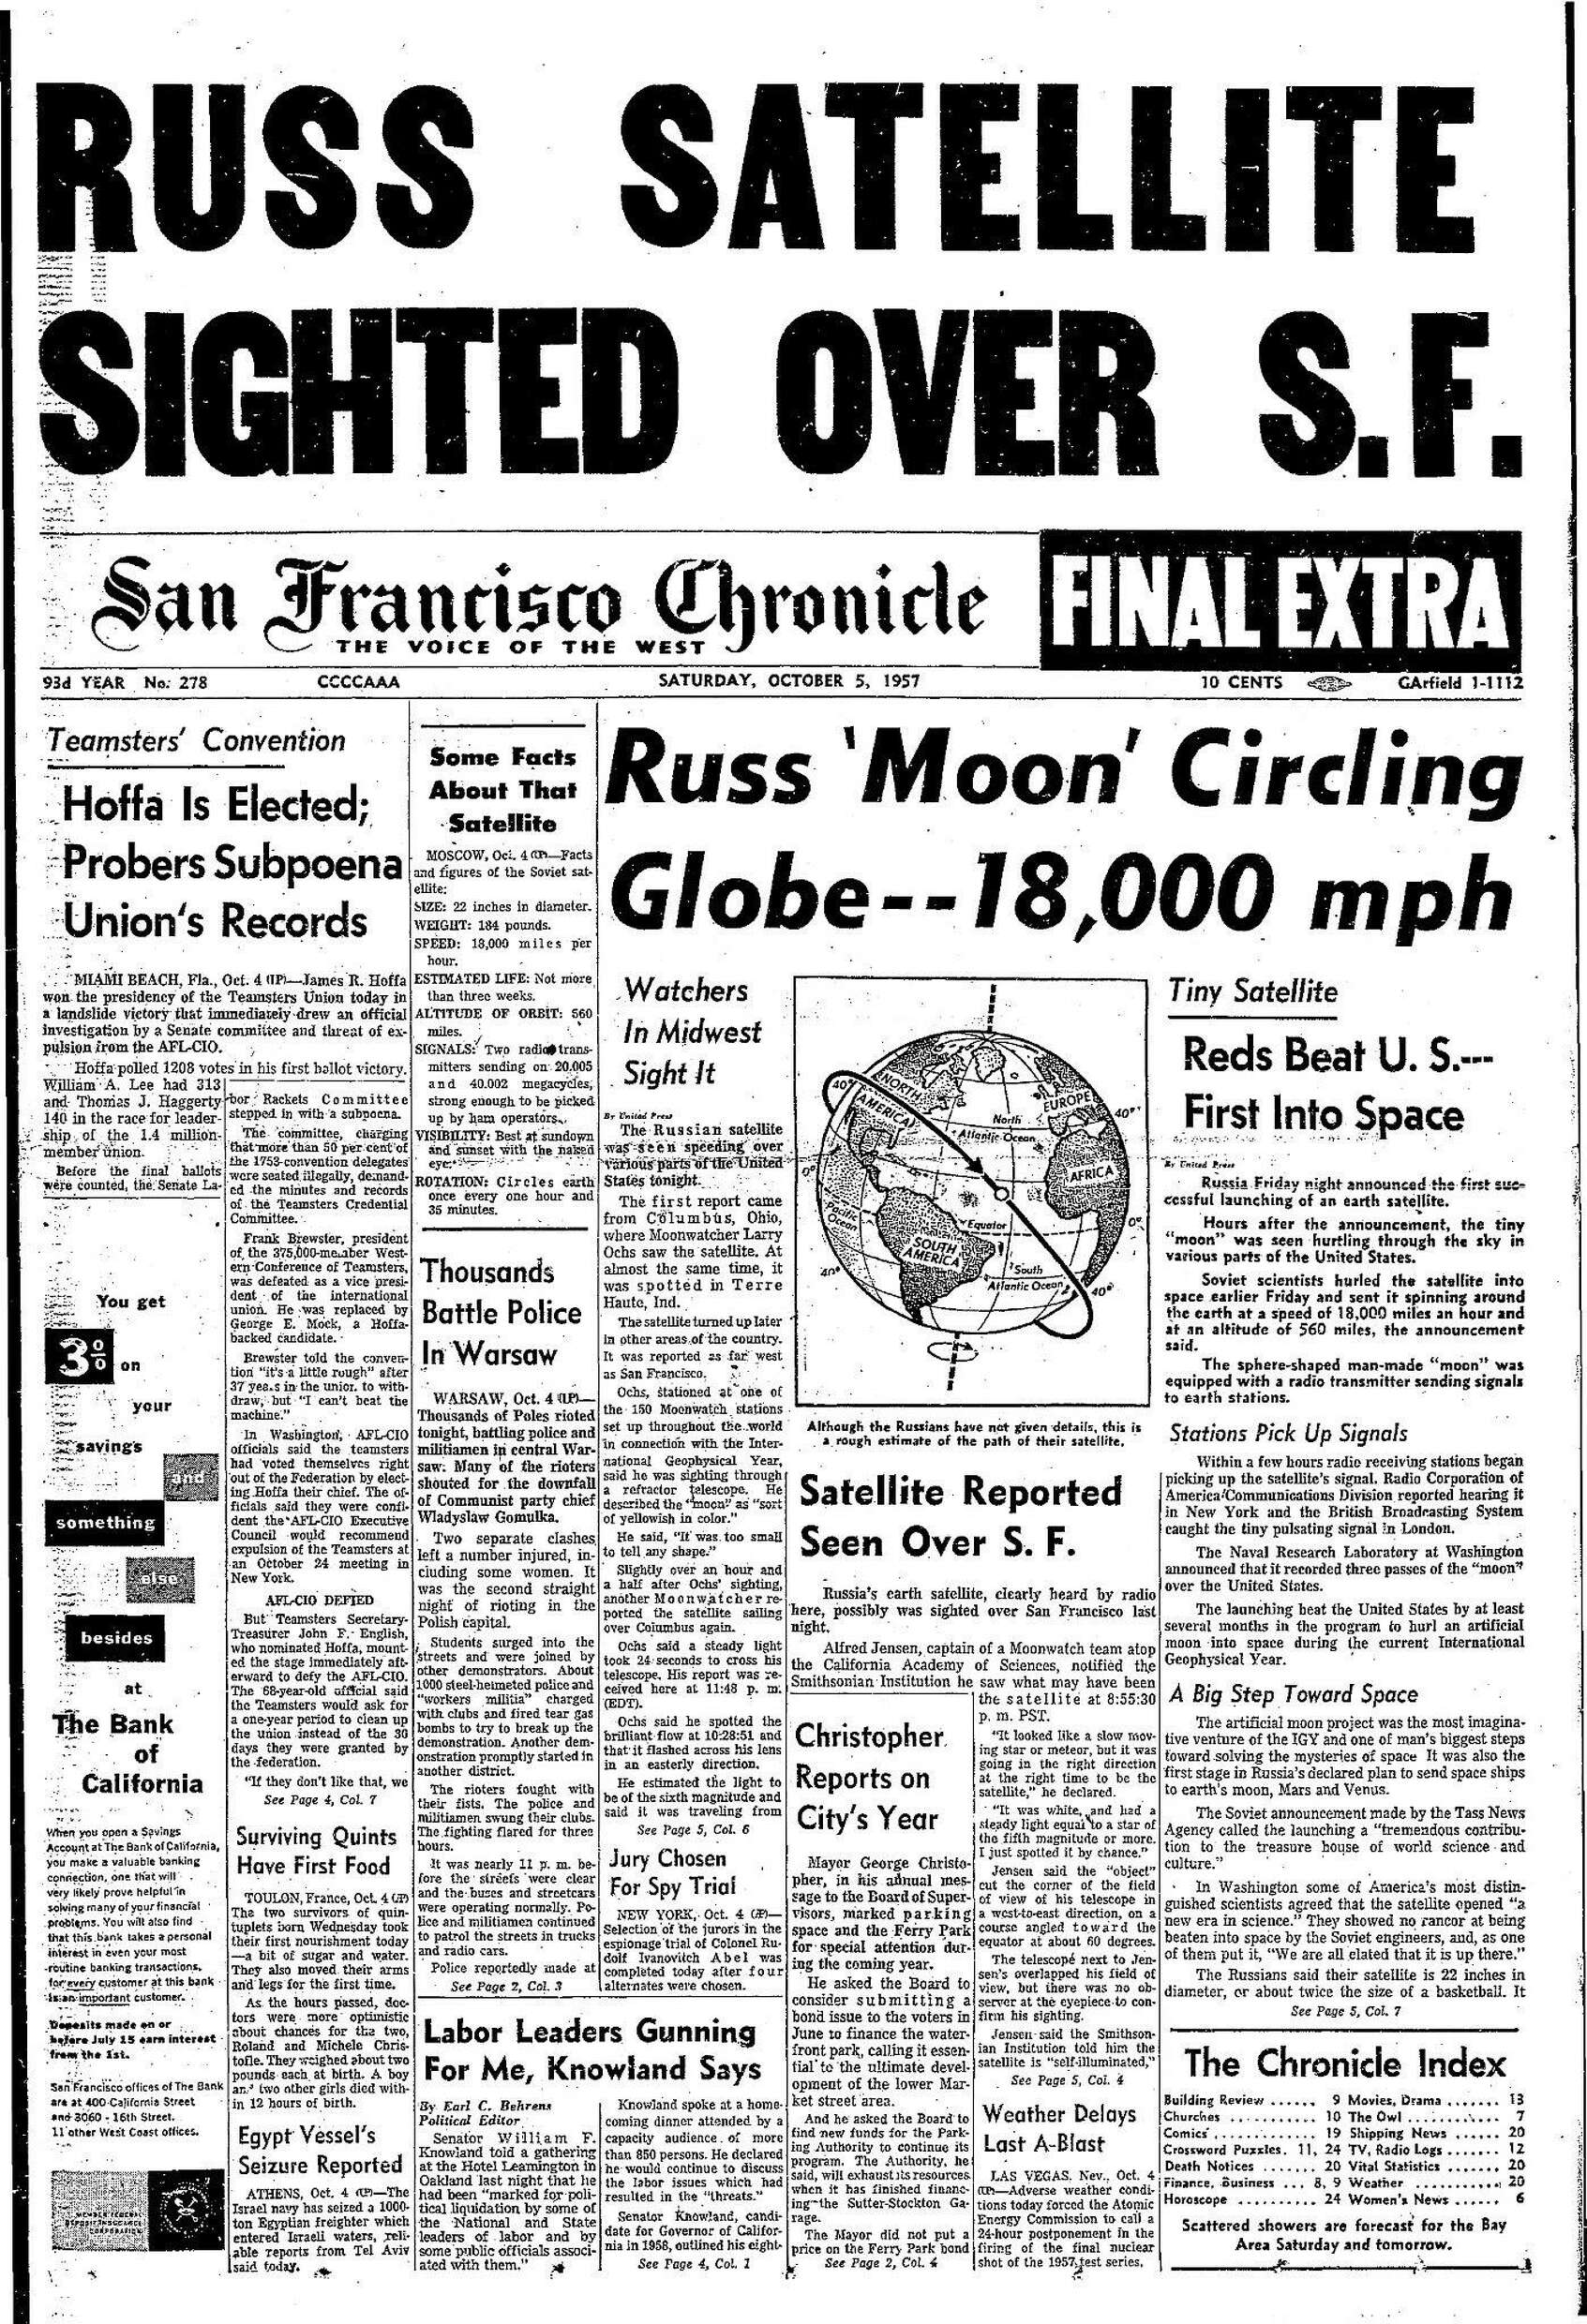 Chronicle Covers: When Soviets' Sputnik started the space race -  SFChronicle.com